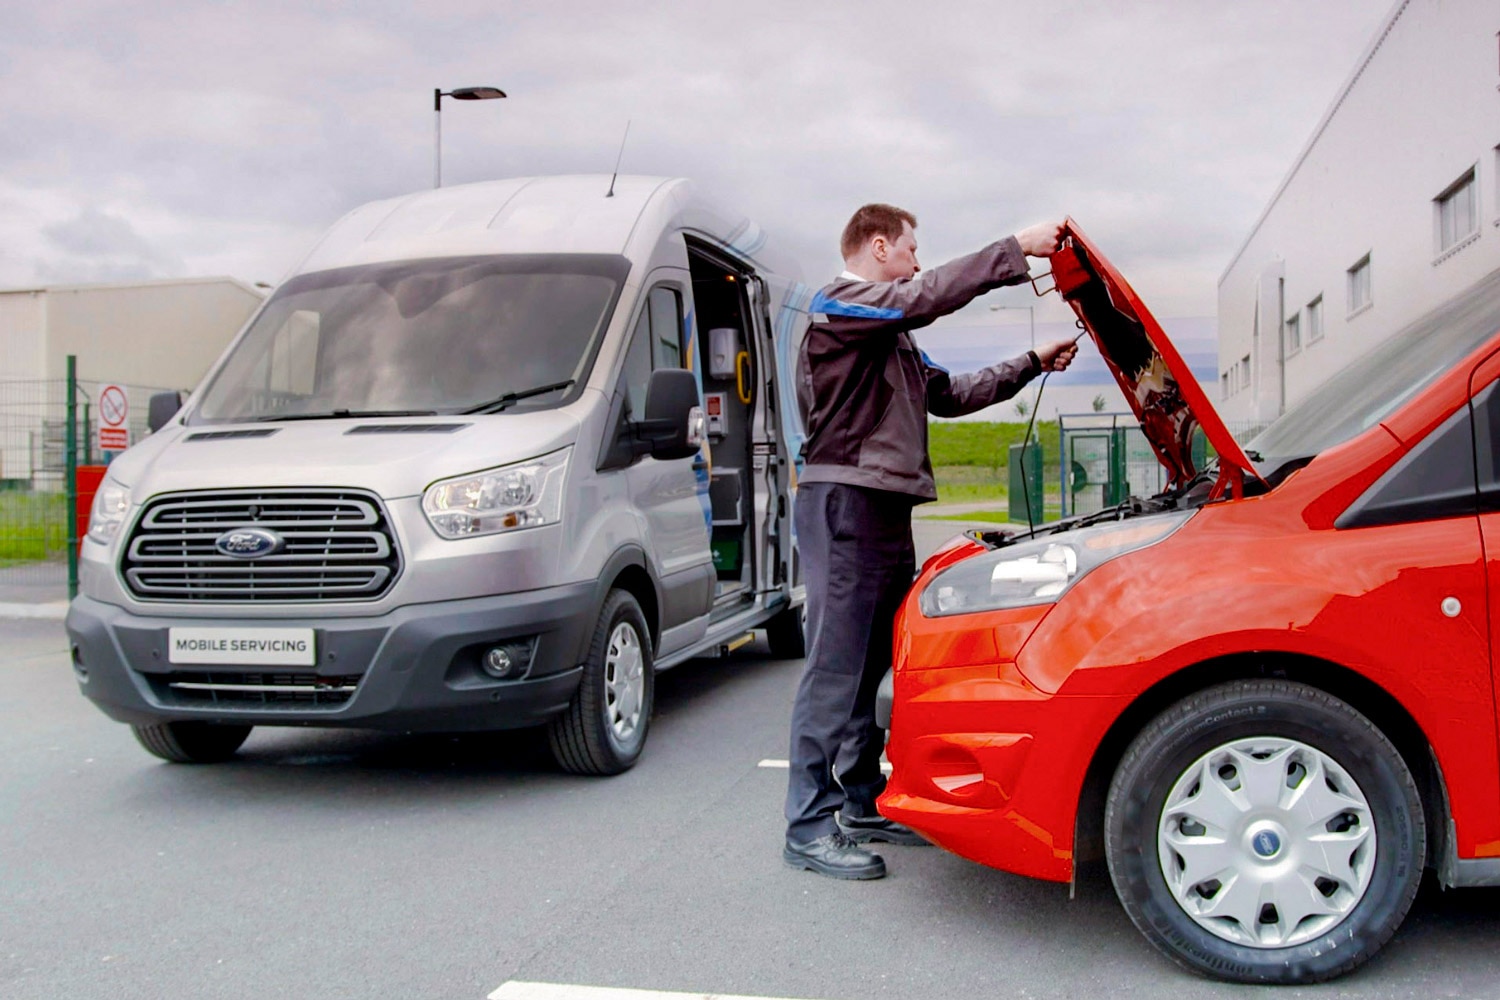 A Ford service tech opens the hood of a red Ford Transit Connect.